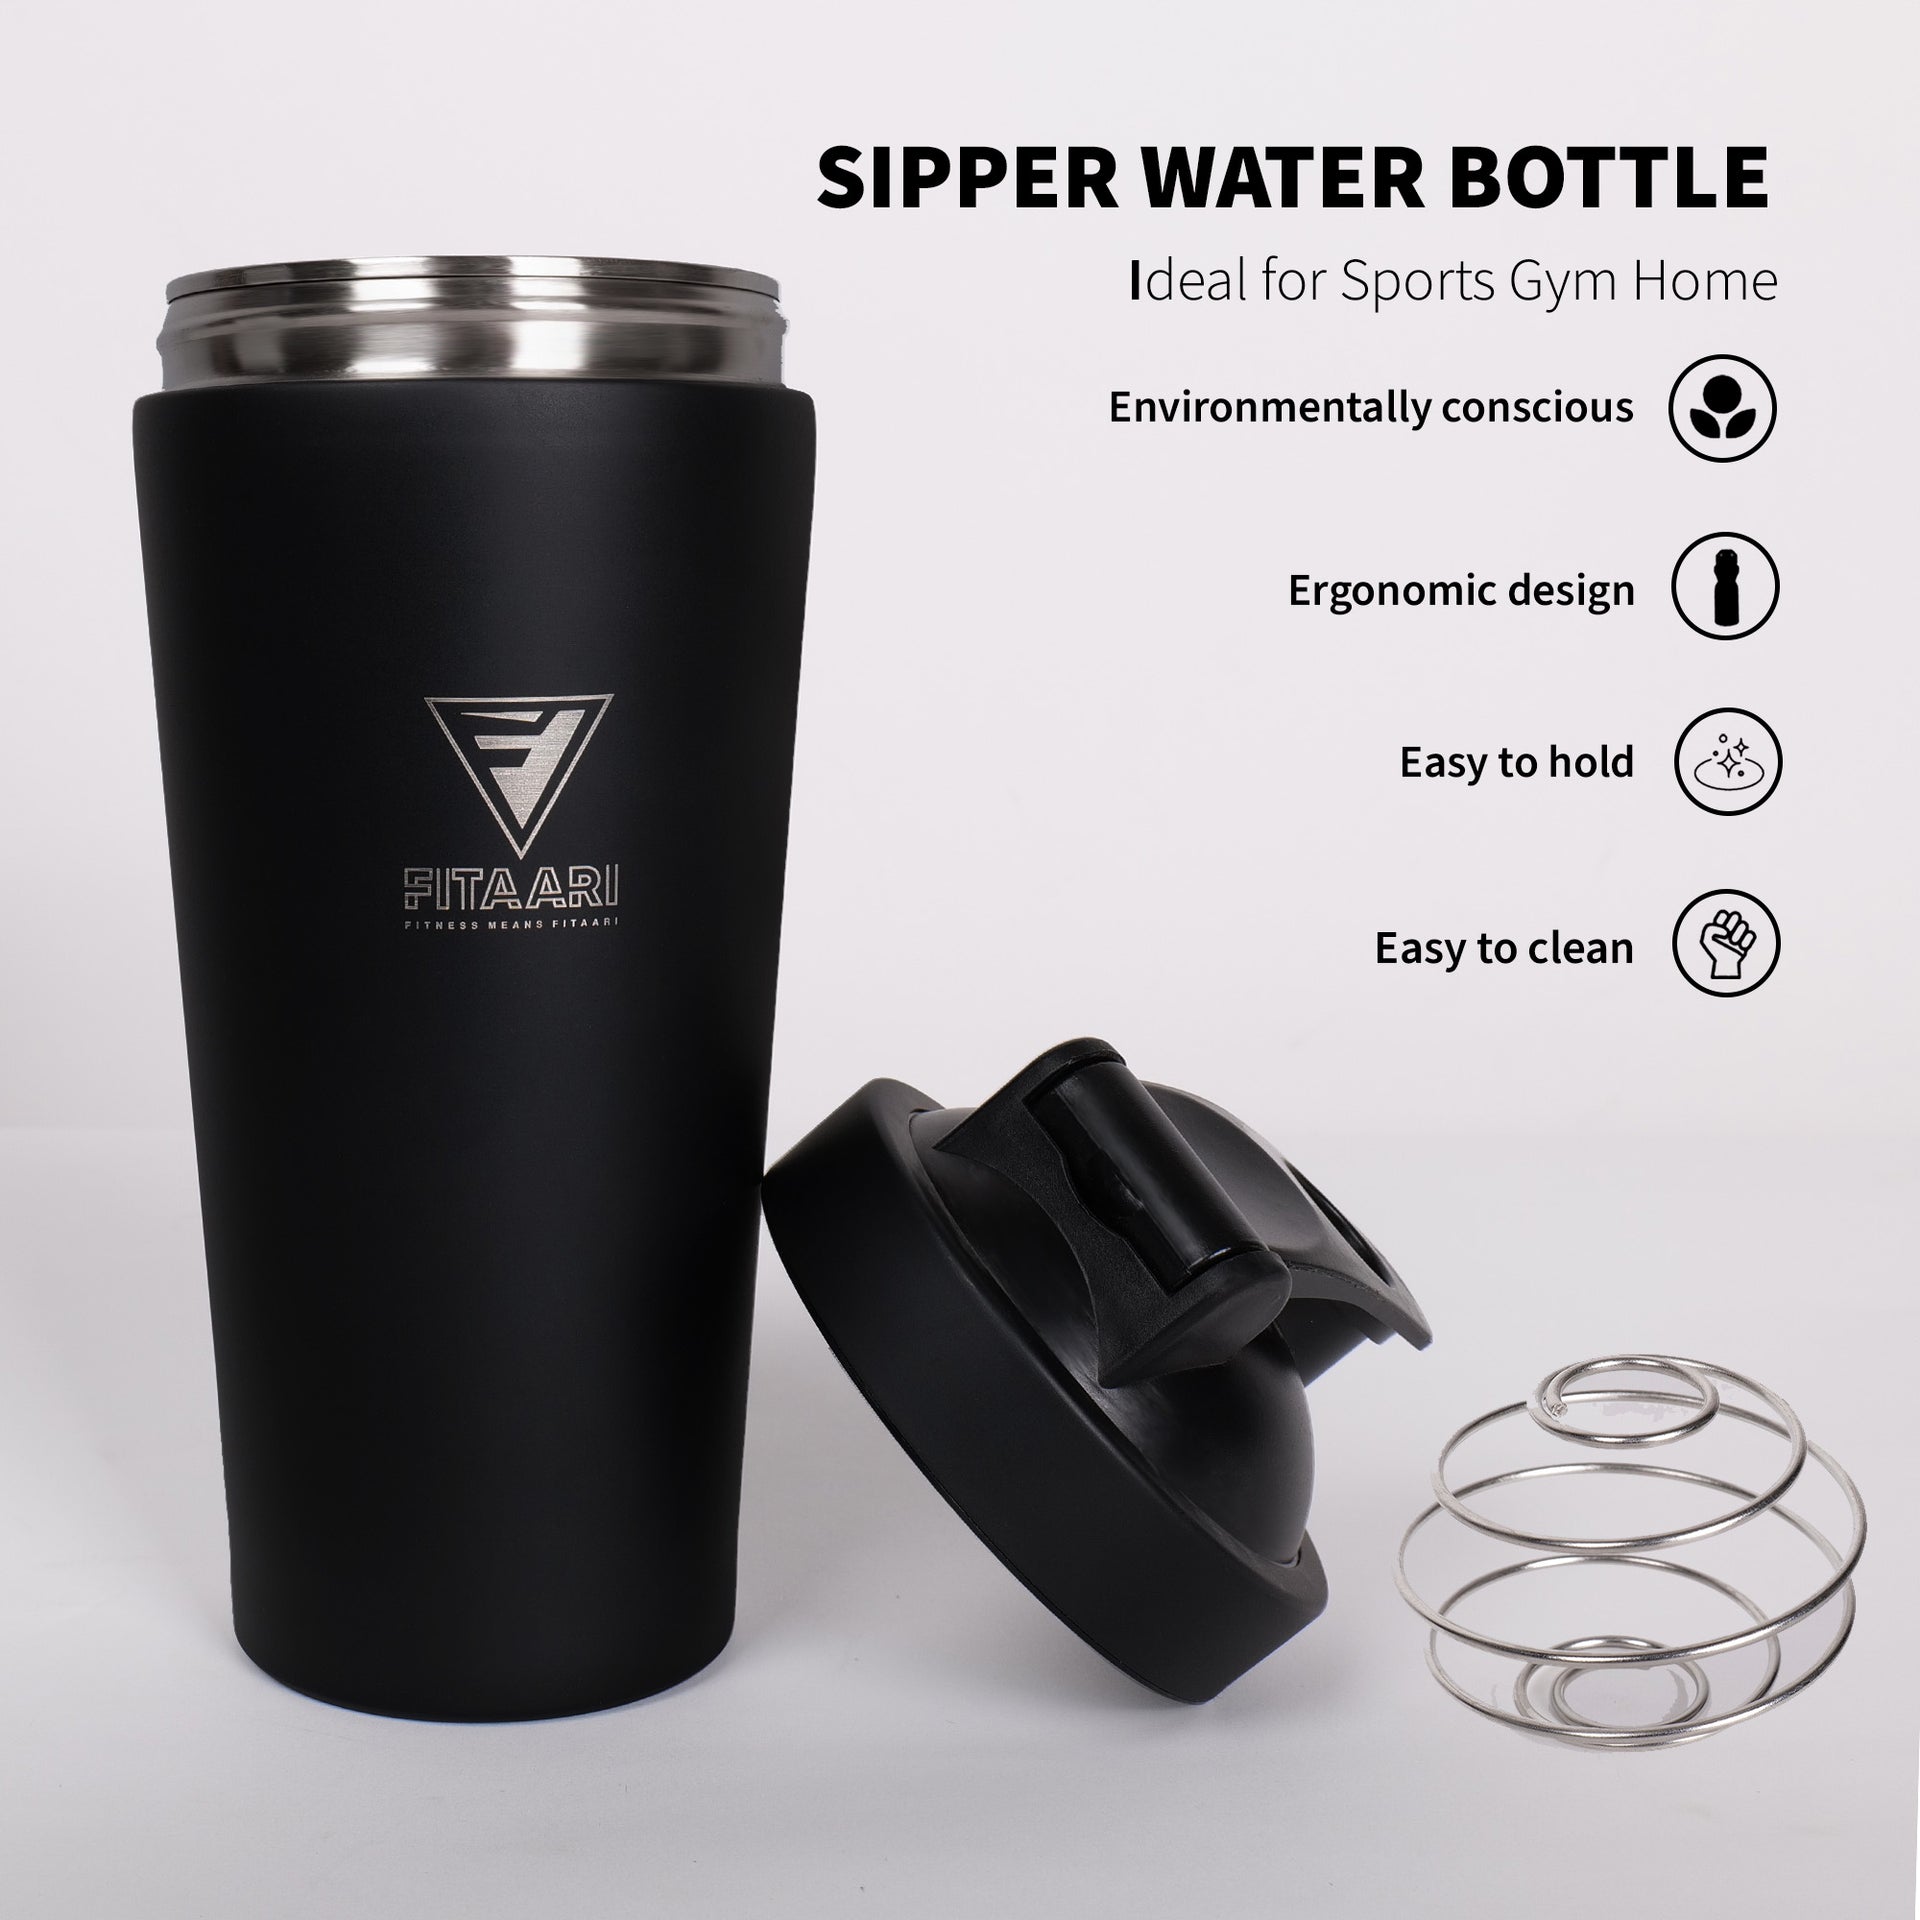 Why Do We Use Steel Shaker Bottles in the Gym and How Often Should You Replace Them?